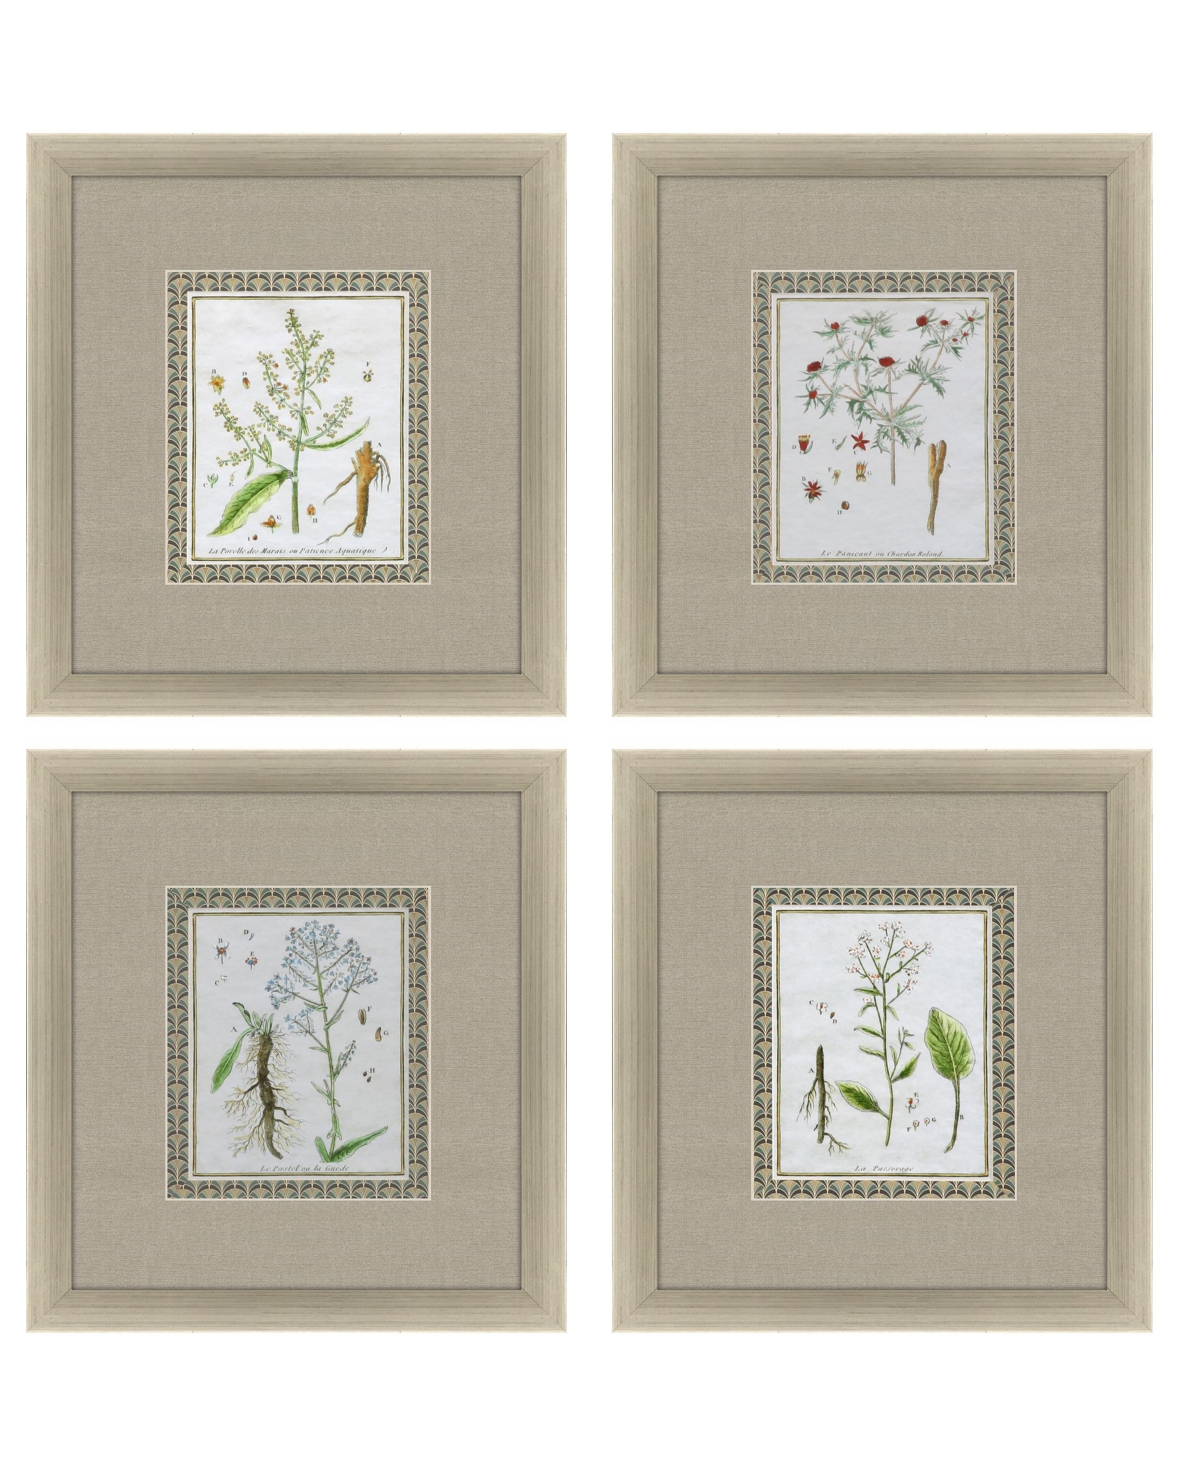 Paragon Picture Gallery La Passerage I Framed Art, Set Of 4 In Green